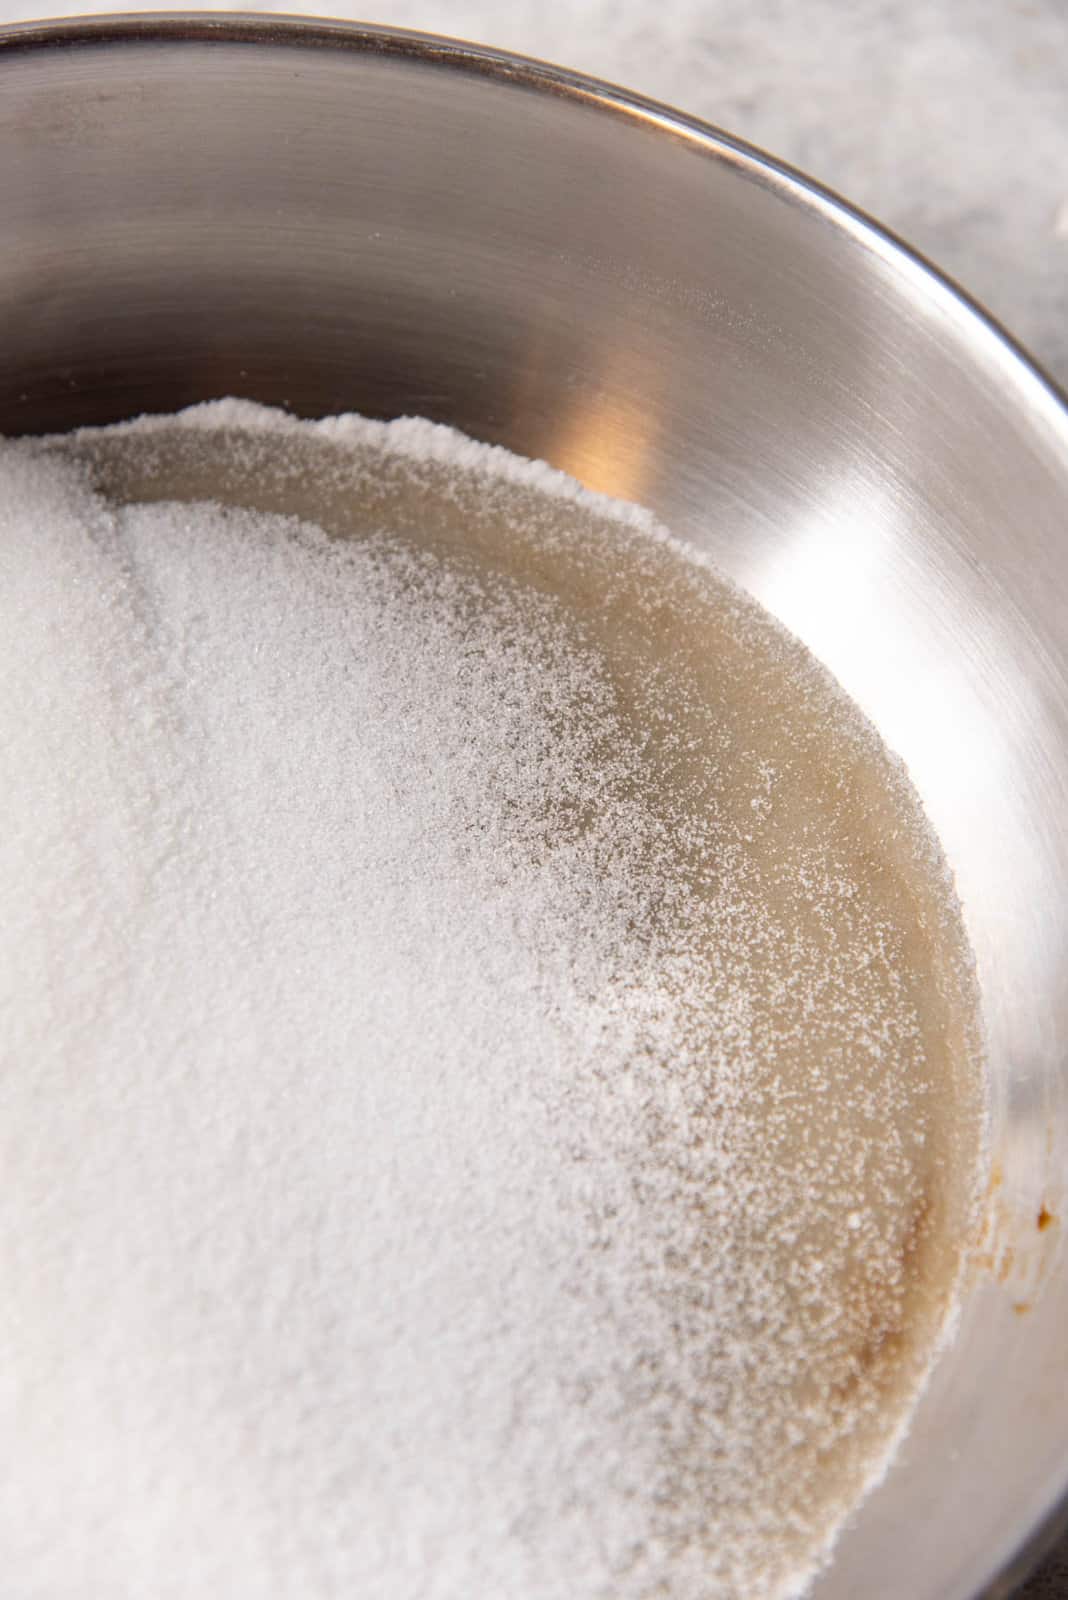 Sugar being cooked in a pan, with the edges melting to form caramel.